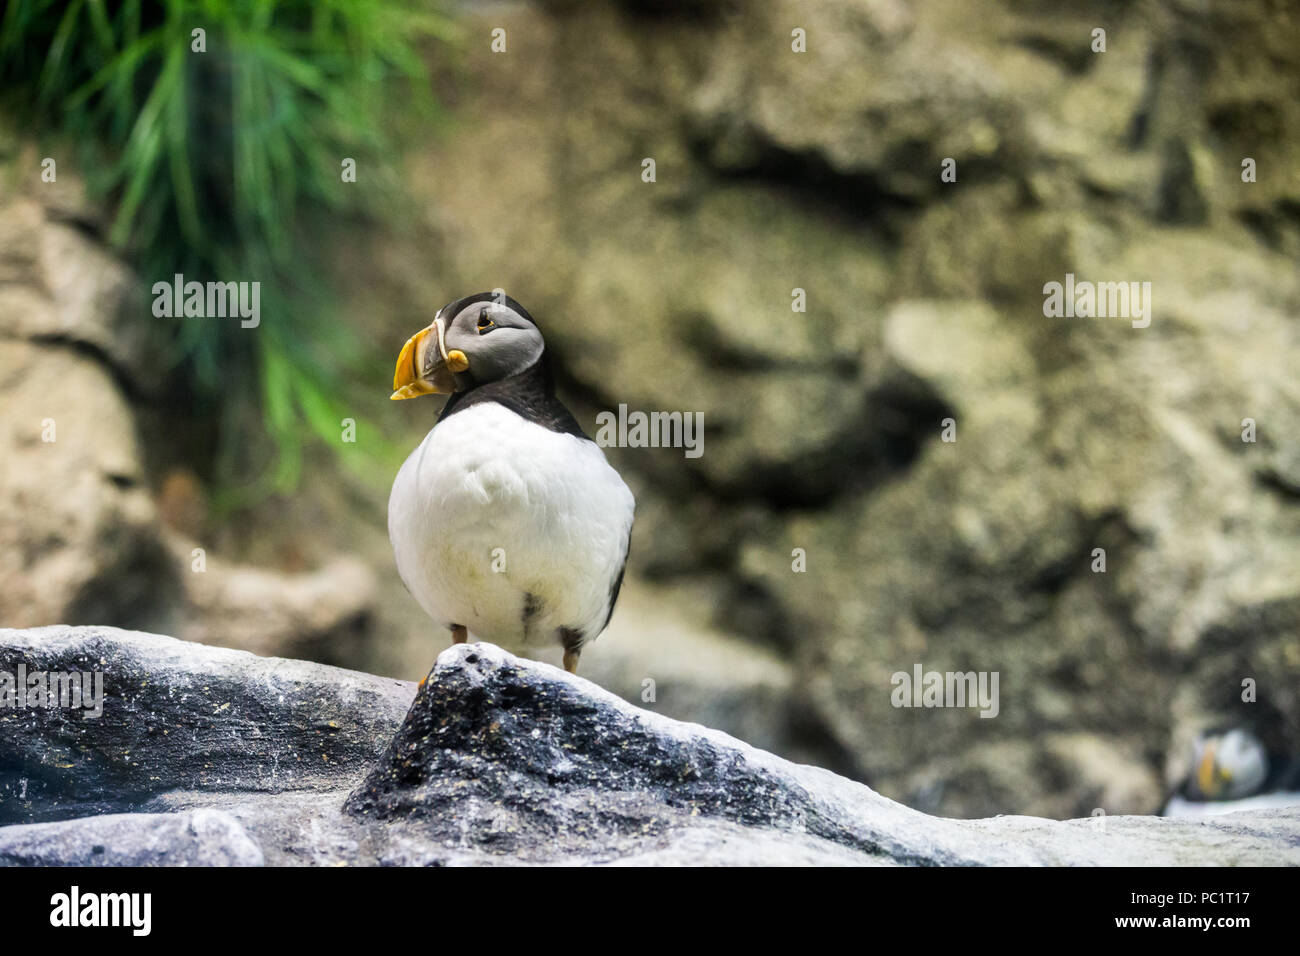 Single Atlantic Puffin standing on Stone in fornt of diffused background, Iceland Stock Photo